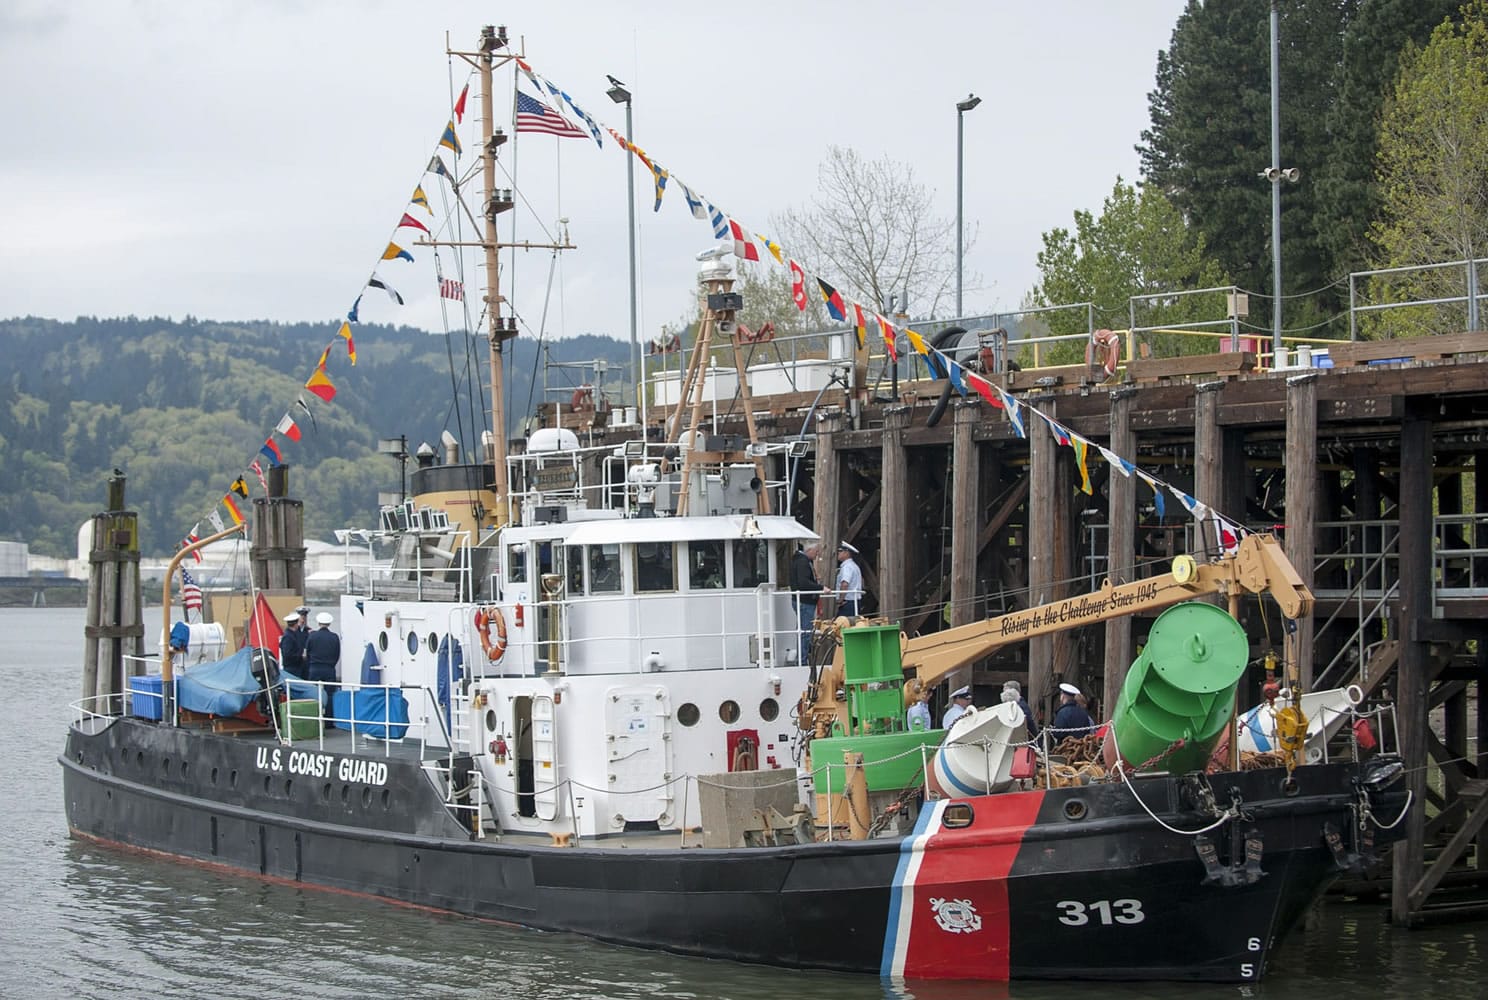 The Coast Guard Cutter Bluebell, part of the 2015 Portland Rose Festival Fleet, is photographed April 3 at its 70th anniversary in Portland.